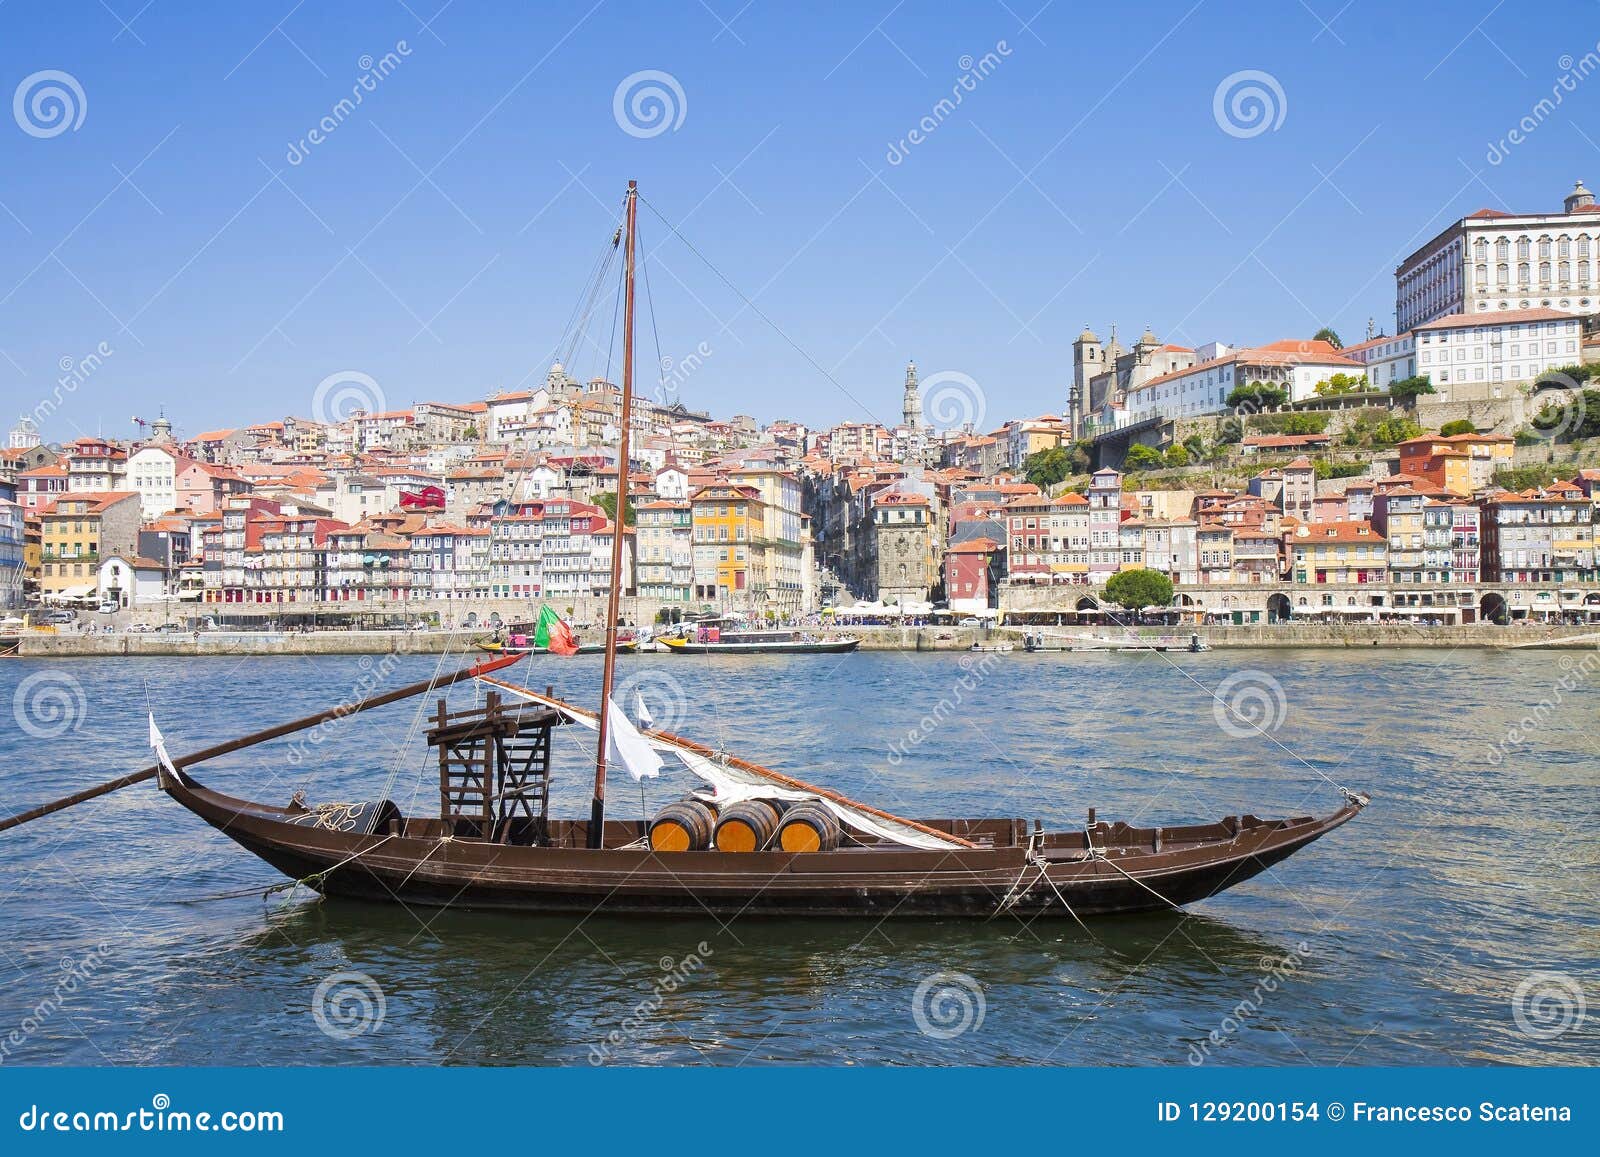 typical portuguese wooden boats, called `barcos rabelo`, used in the past to transport the famous port wine porto-oporto-portugal